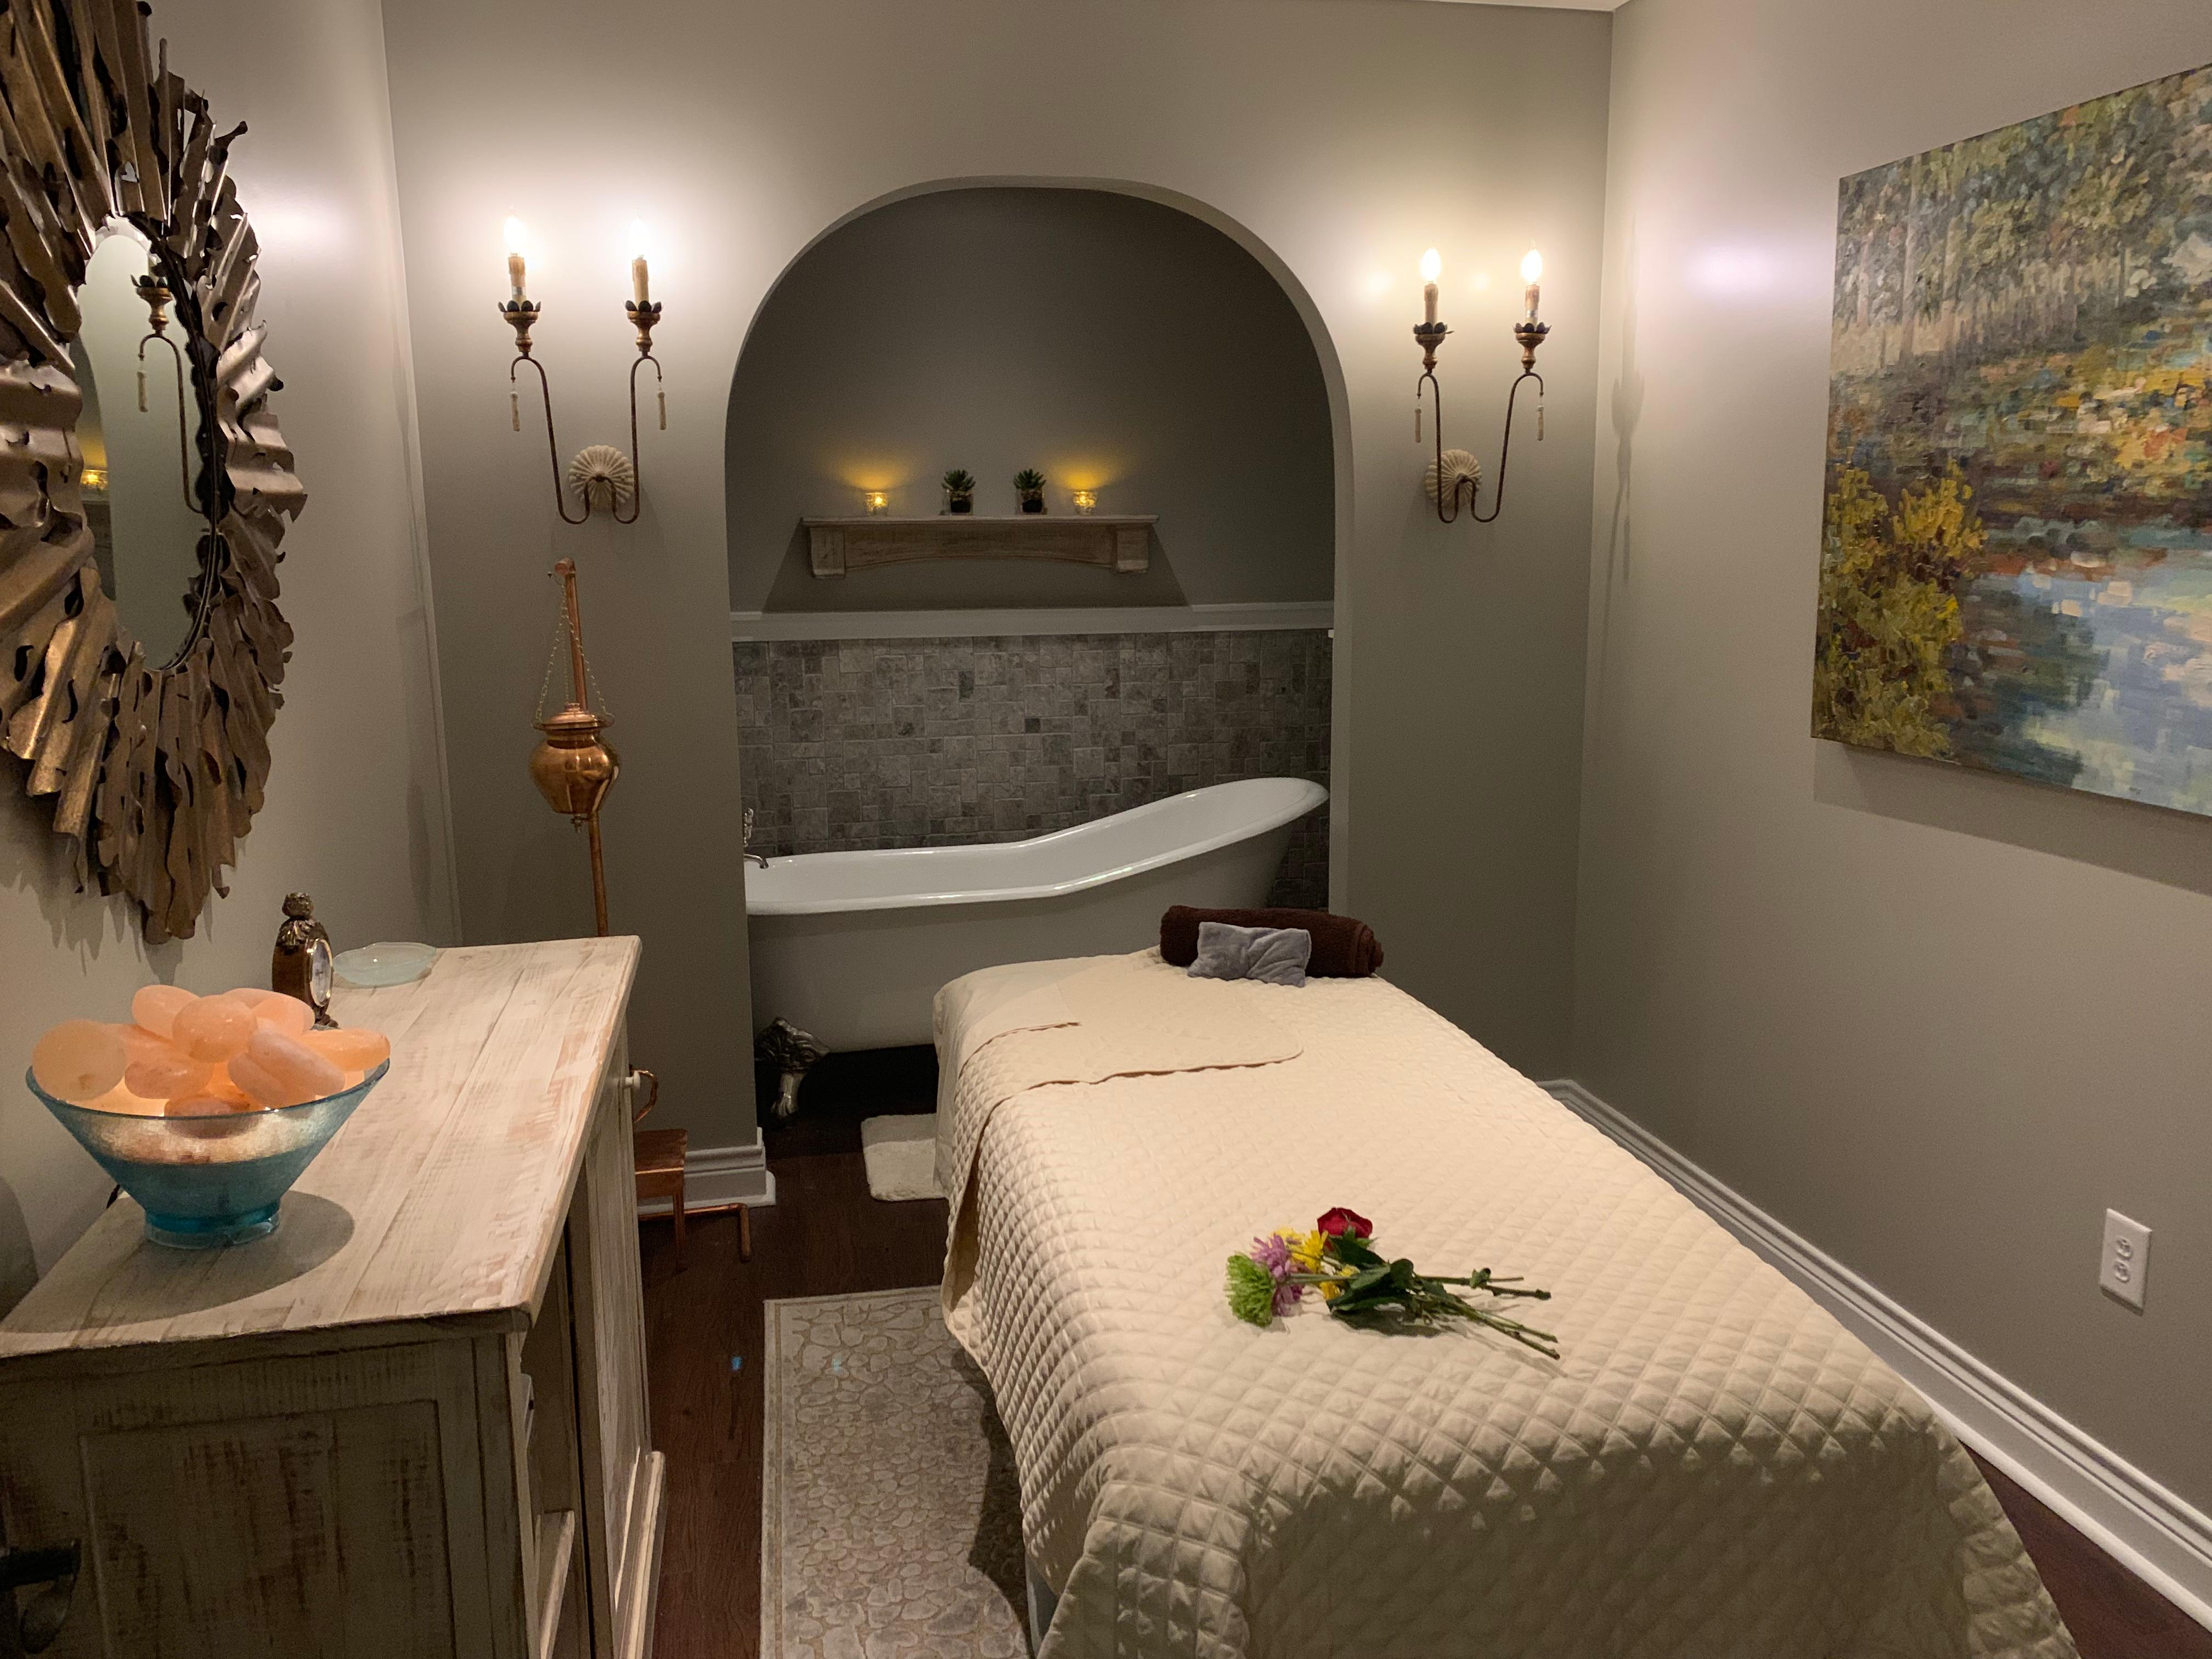 The Woodhouse Day Spa - The Woodlands, TX Photo